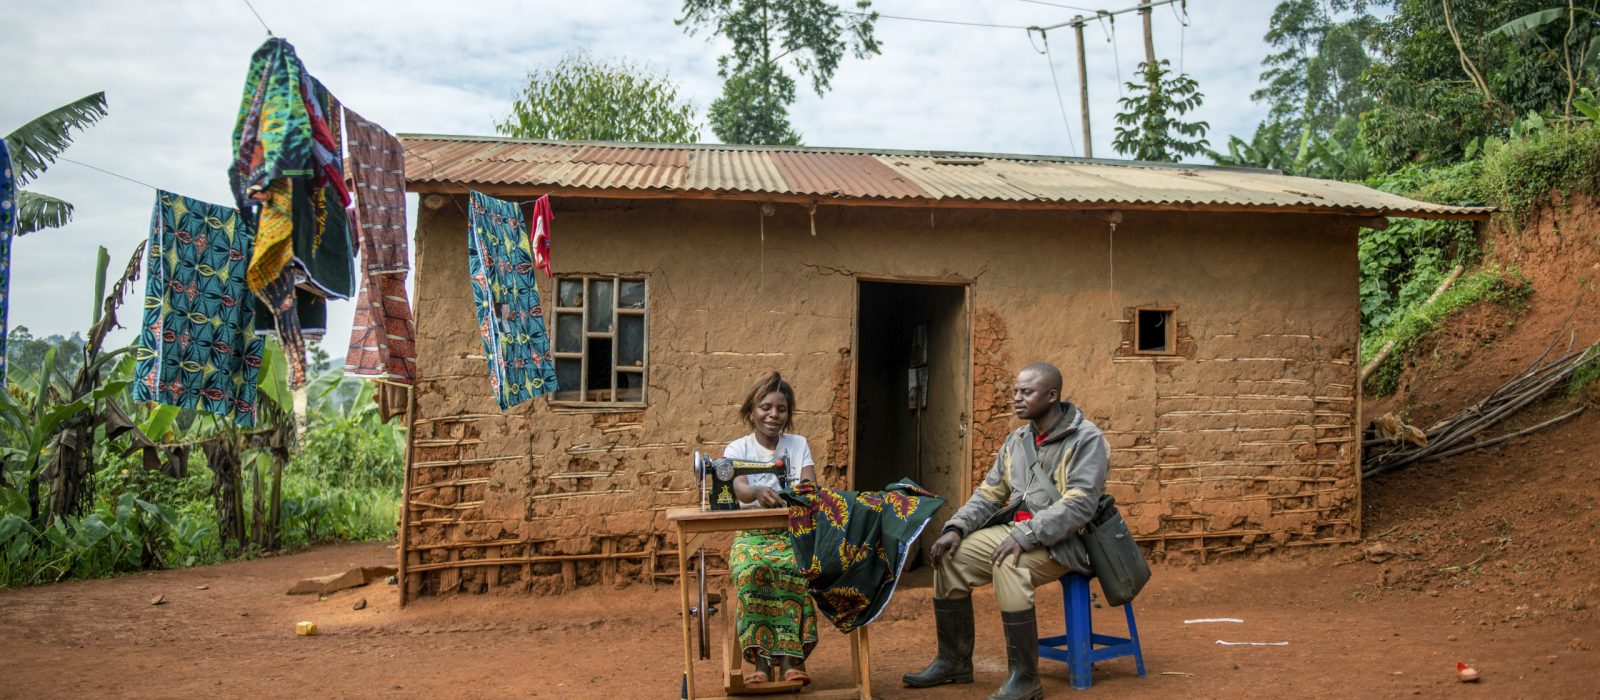 Masika Sivenfire, 24 years old and the mother of 4, talks to Avec trainer, Kakule Kitshemwe, for a credit monitoring session in the village of Amini Yesu, Democratic Republic of Congo, on 13 December 2021. Beneficiary of the loans in the AVEC group, Masika SIVENDIRE, bought a machine to create a secondary income generating activity to support her family. She says, 'before, I used to go to the fields every day, but since I took part in the programme, I have been able to pay for a sewing machine and thanks to this profession of dressmaker that I practice, I manage to earn some money to make my weekly contributions to the group.' Tearfund Canada continues to support several training and outreach programmes, with the help of CBCA, in the Democratic Republic of Congo in order to assist vulnerable communities out of poverty.